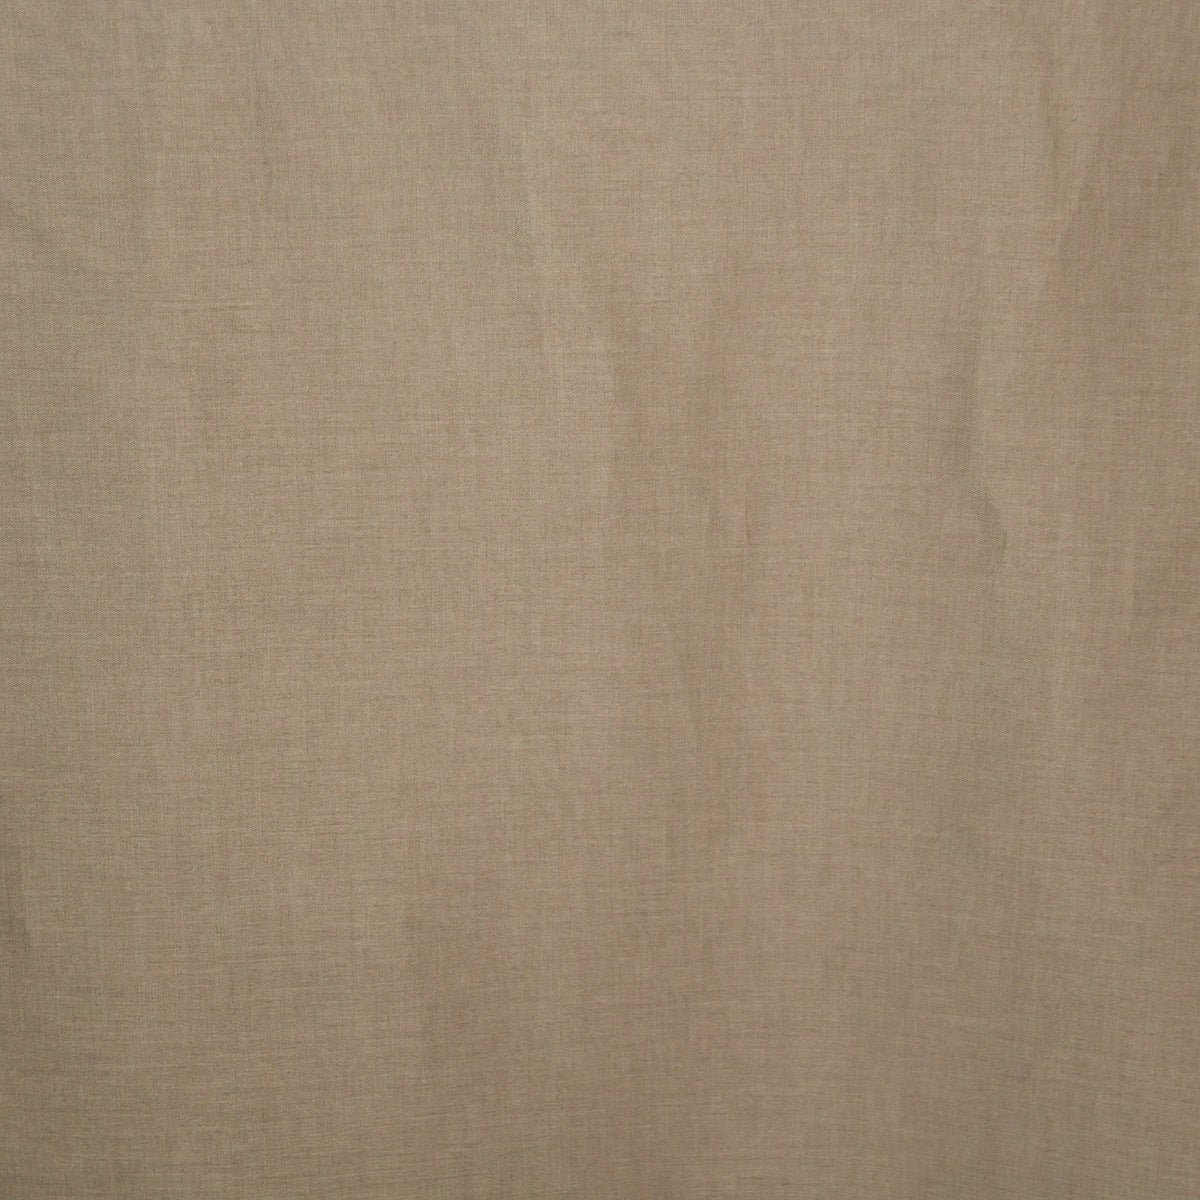 Day curtain gray beige Sol